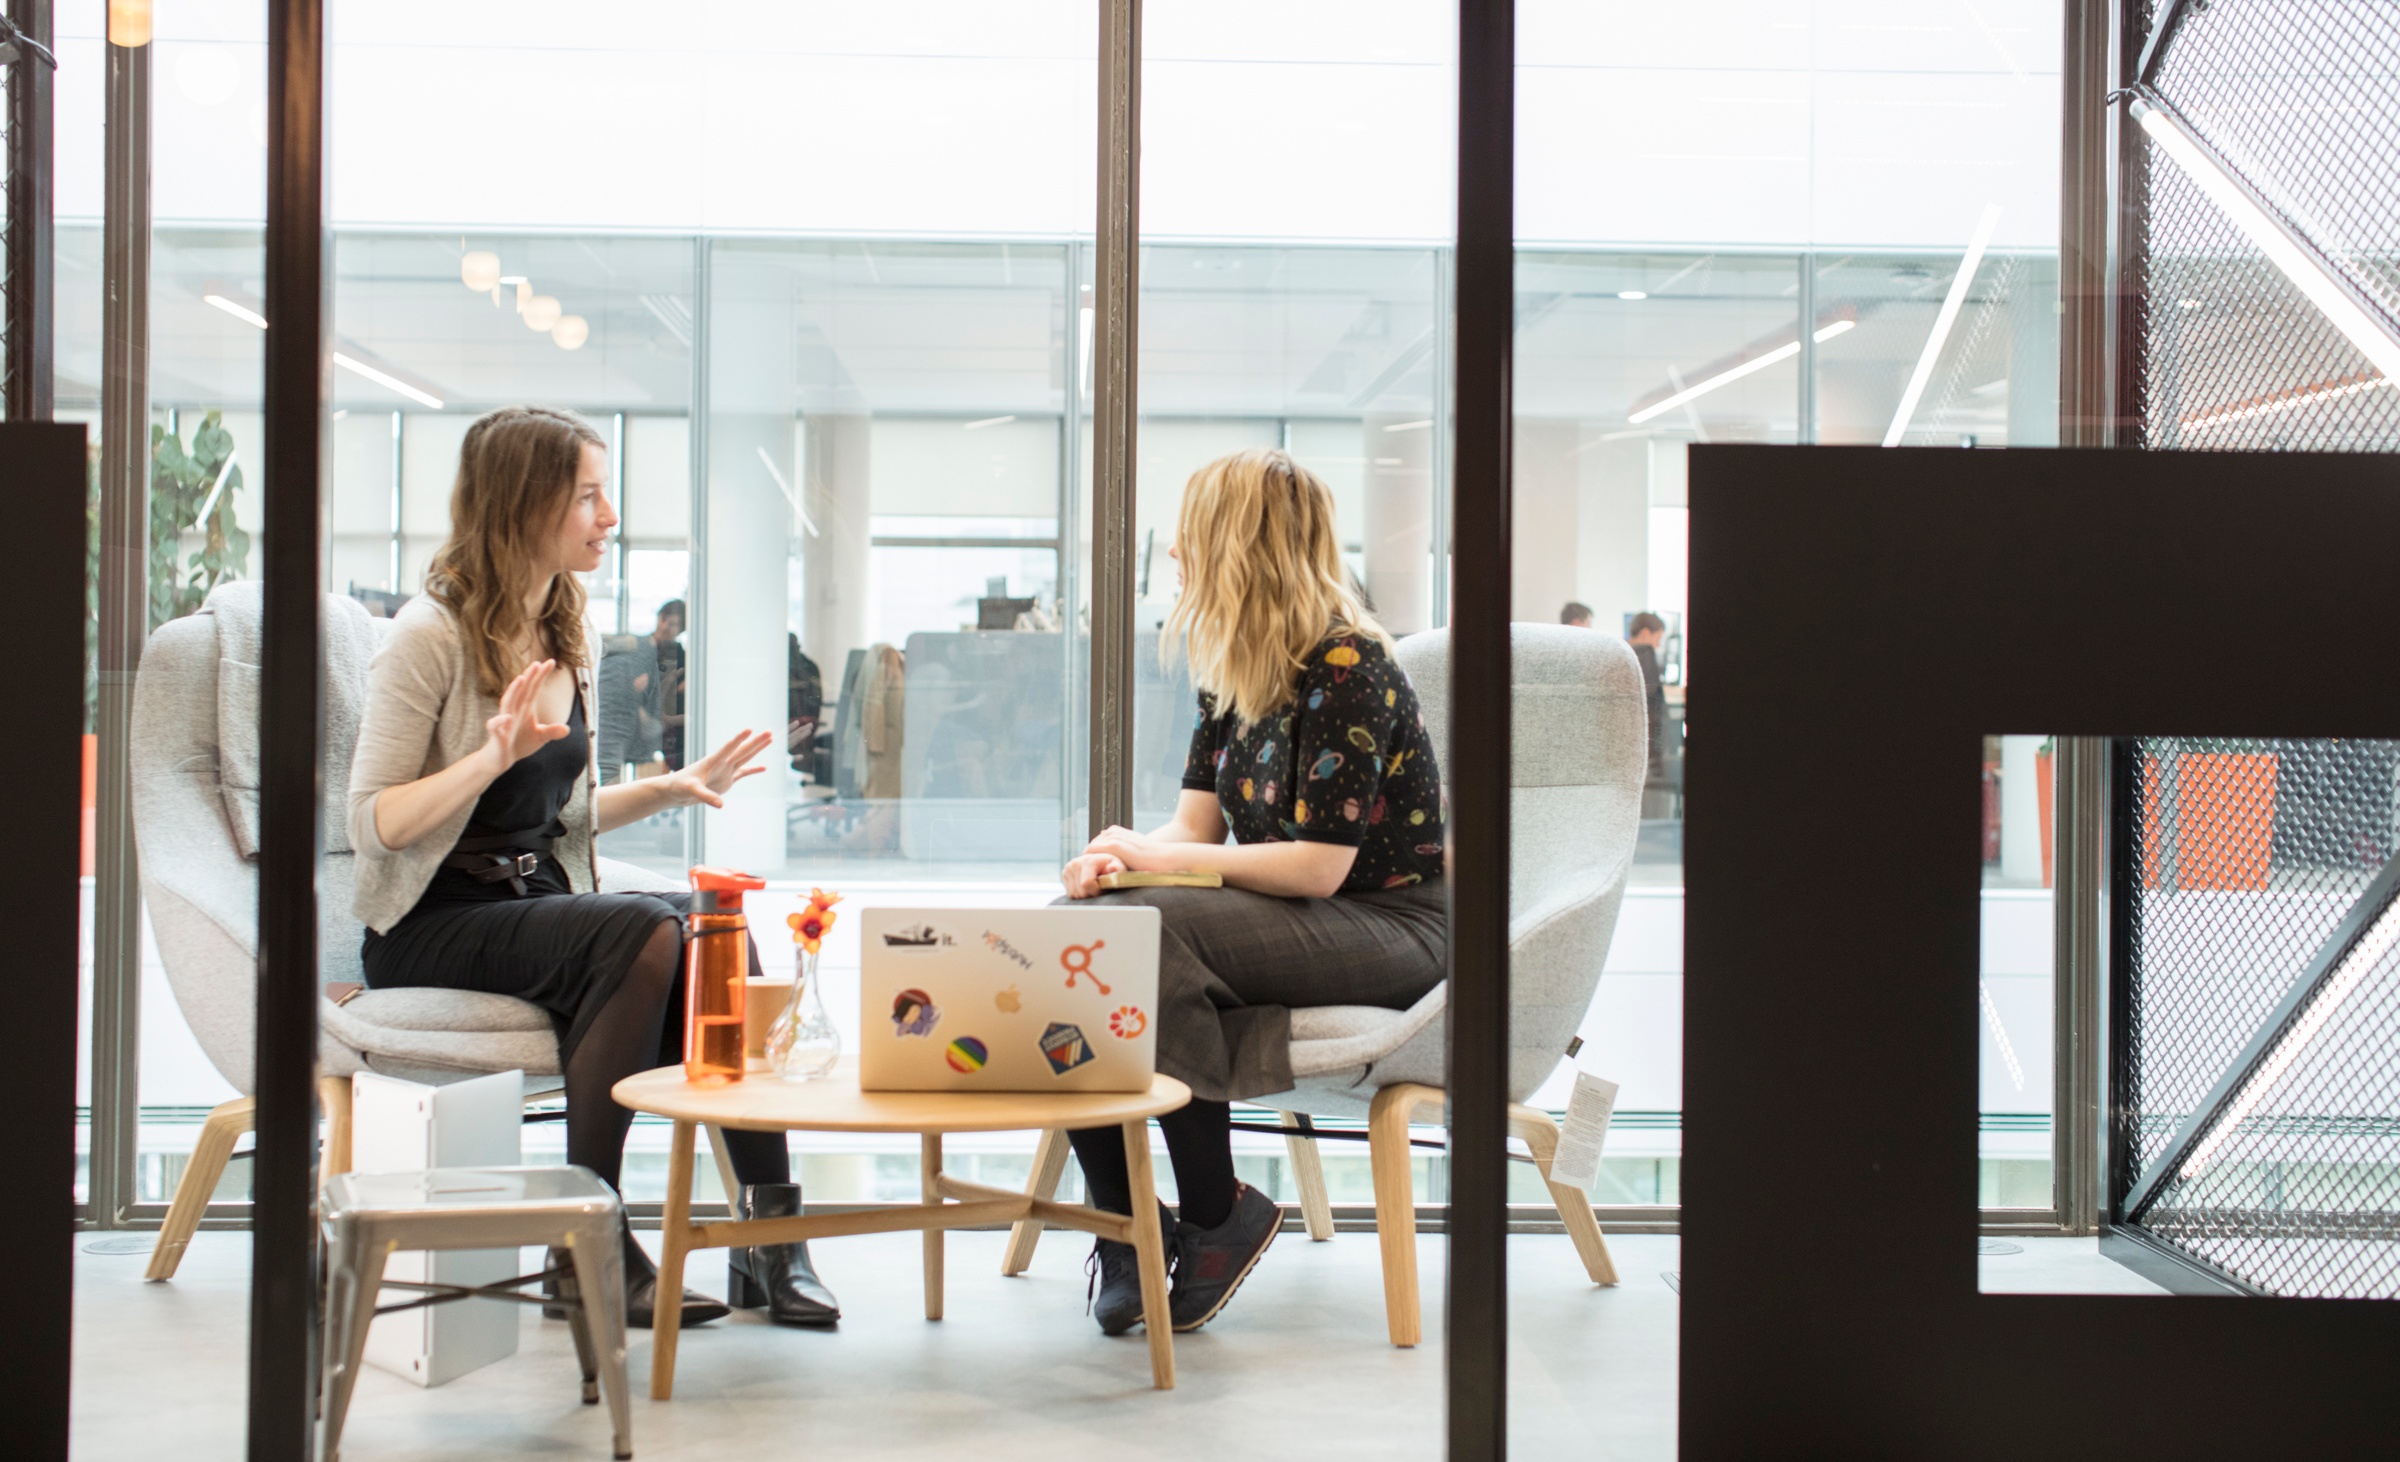 6 Ways to Make the Most of Your One-on-One Meeting